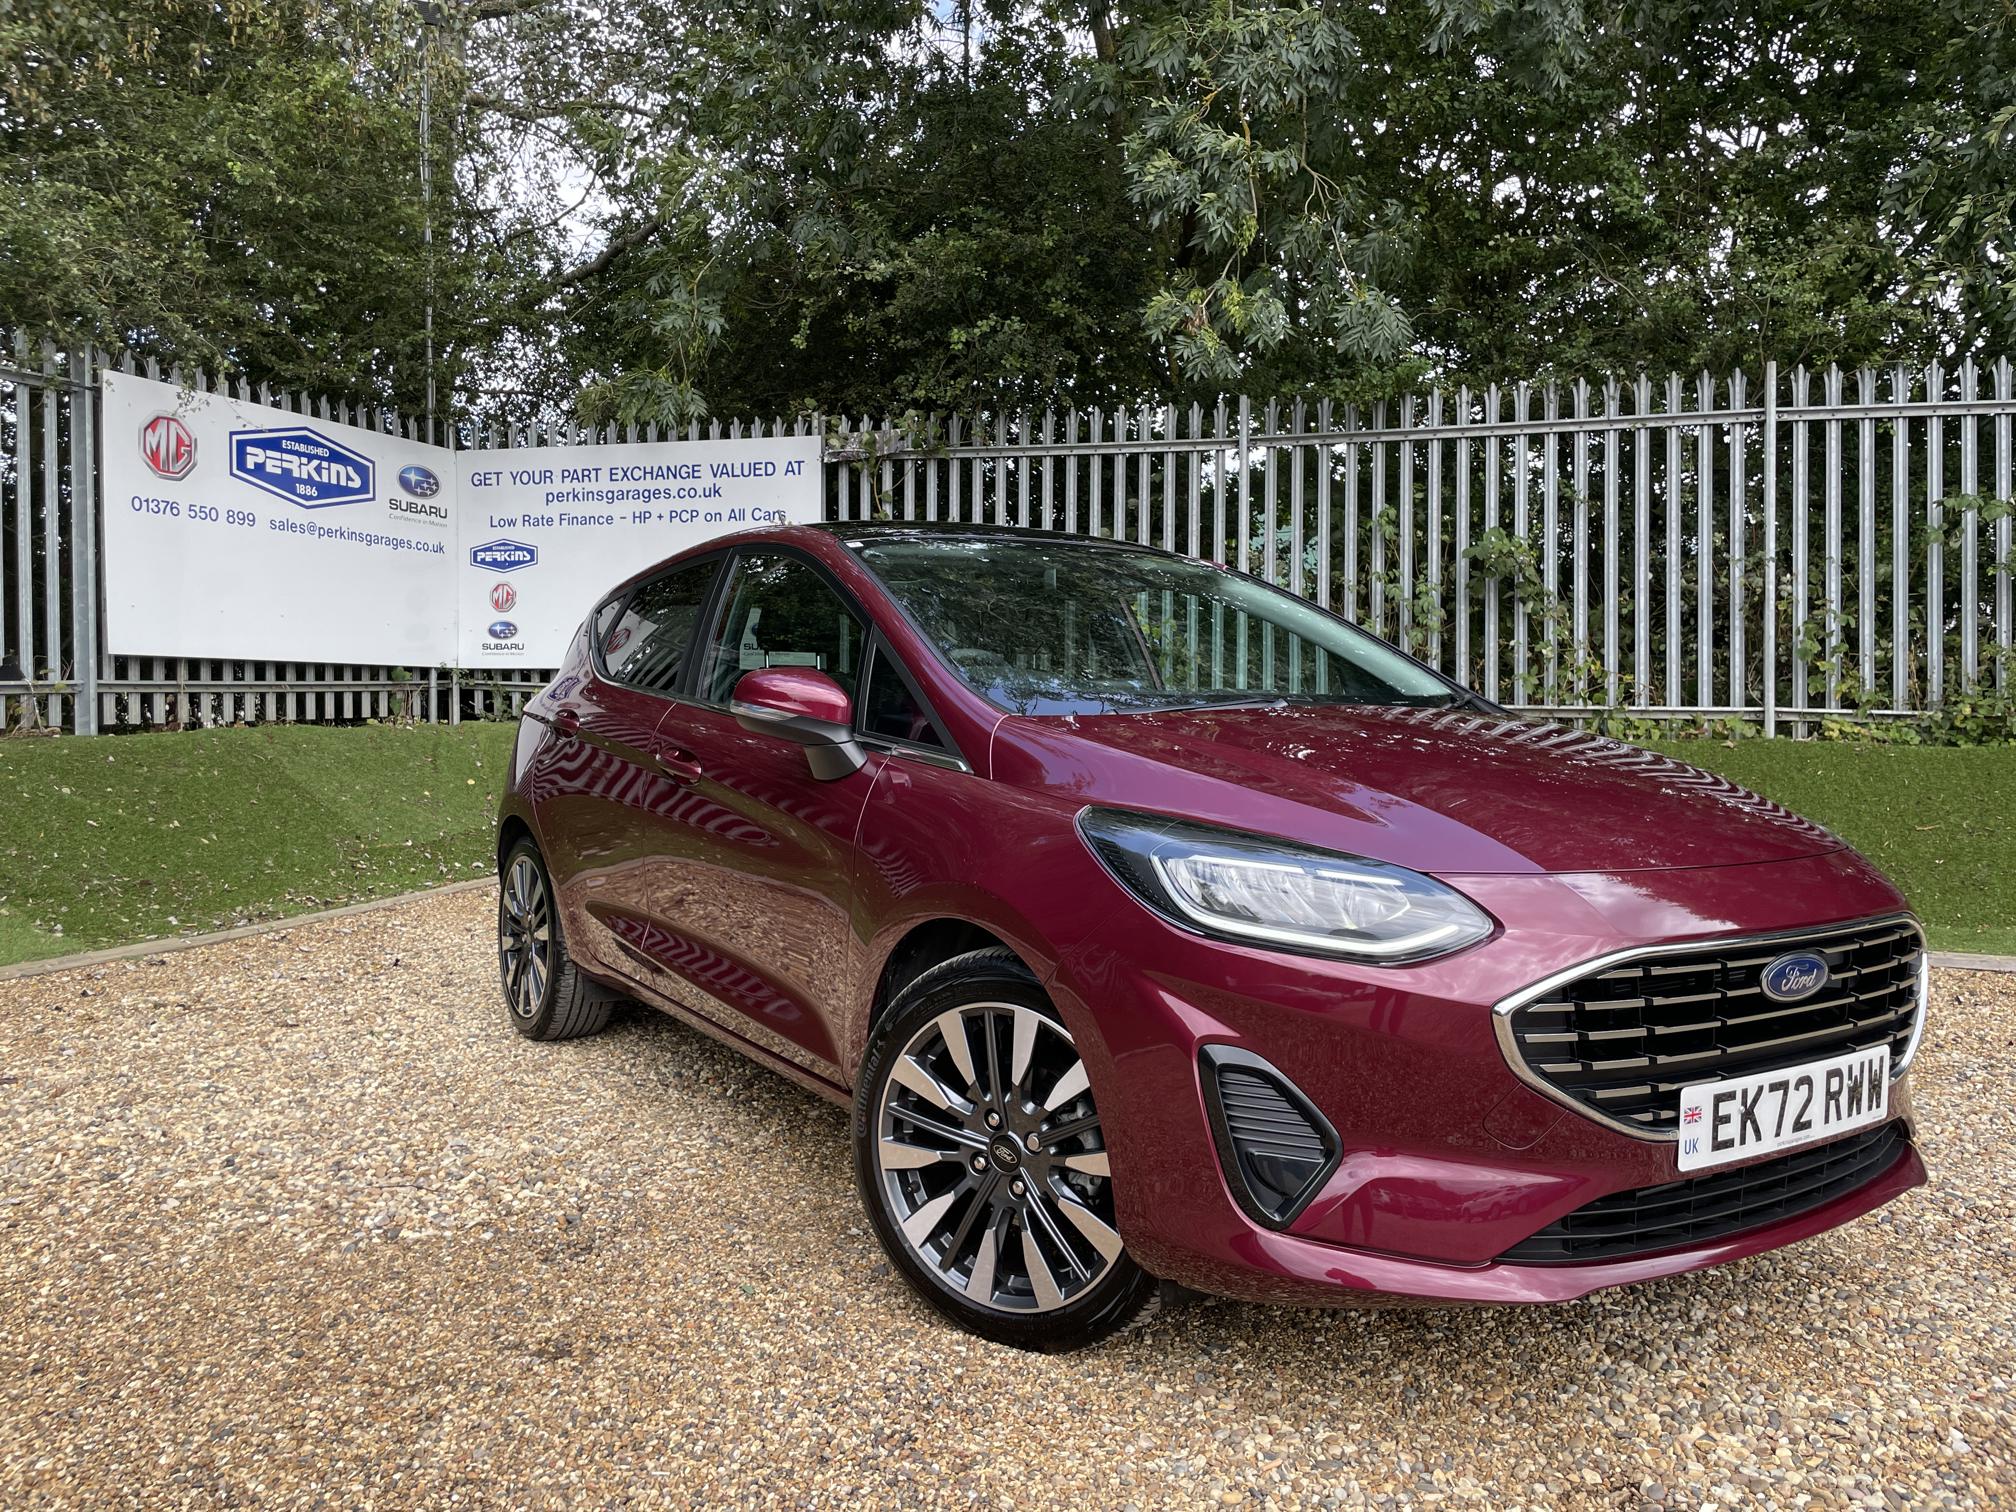 Used Ford Fiesta Automatic for sale Vignale